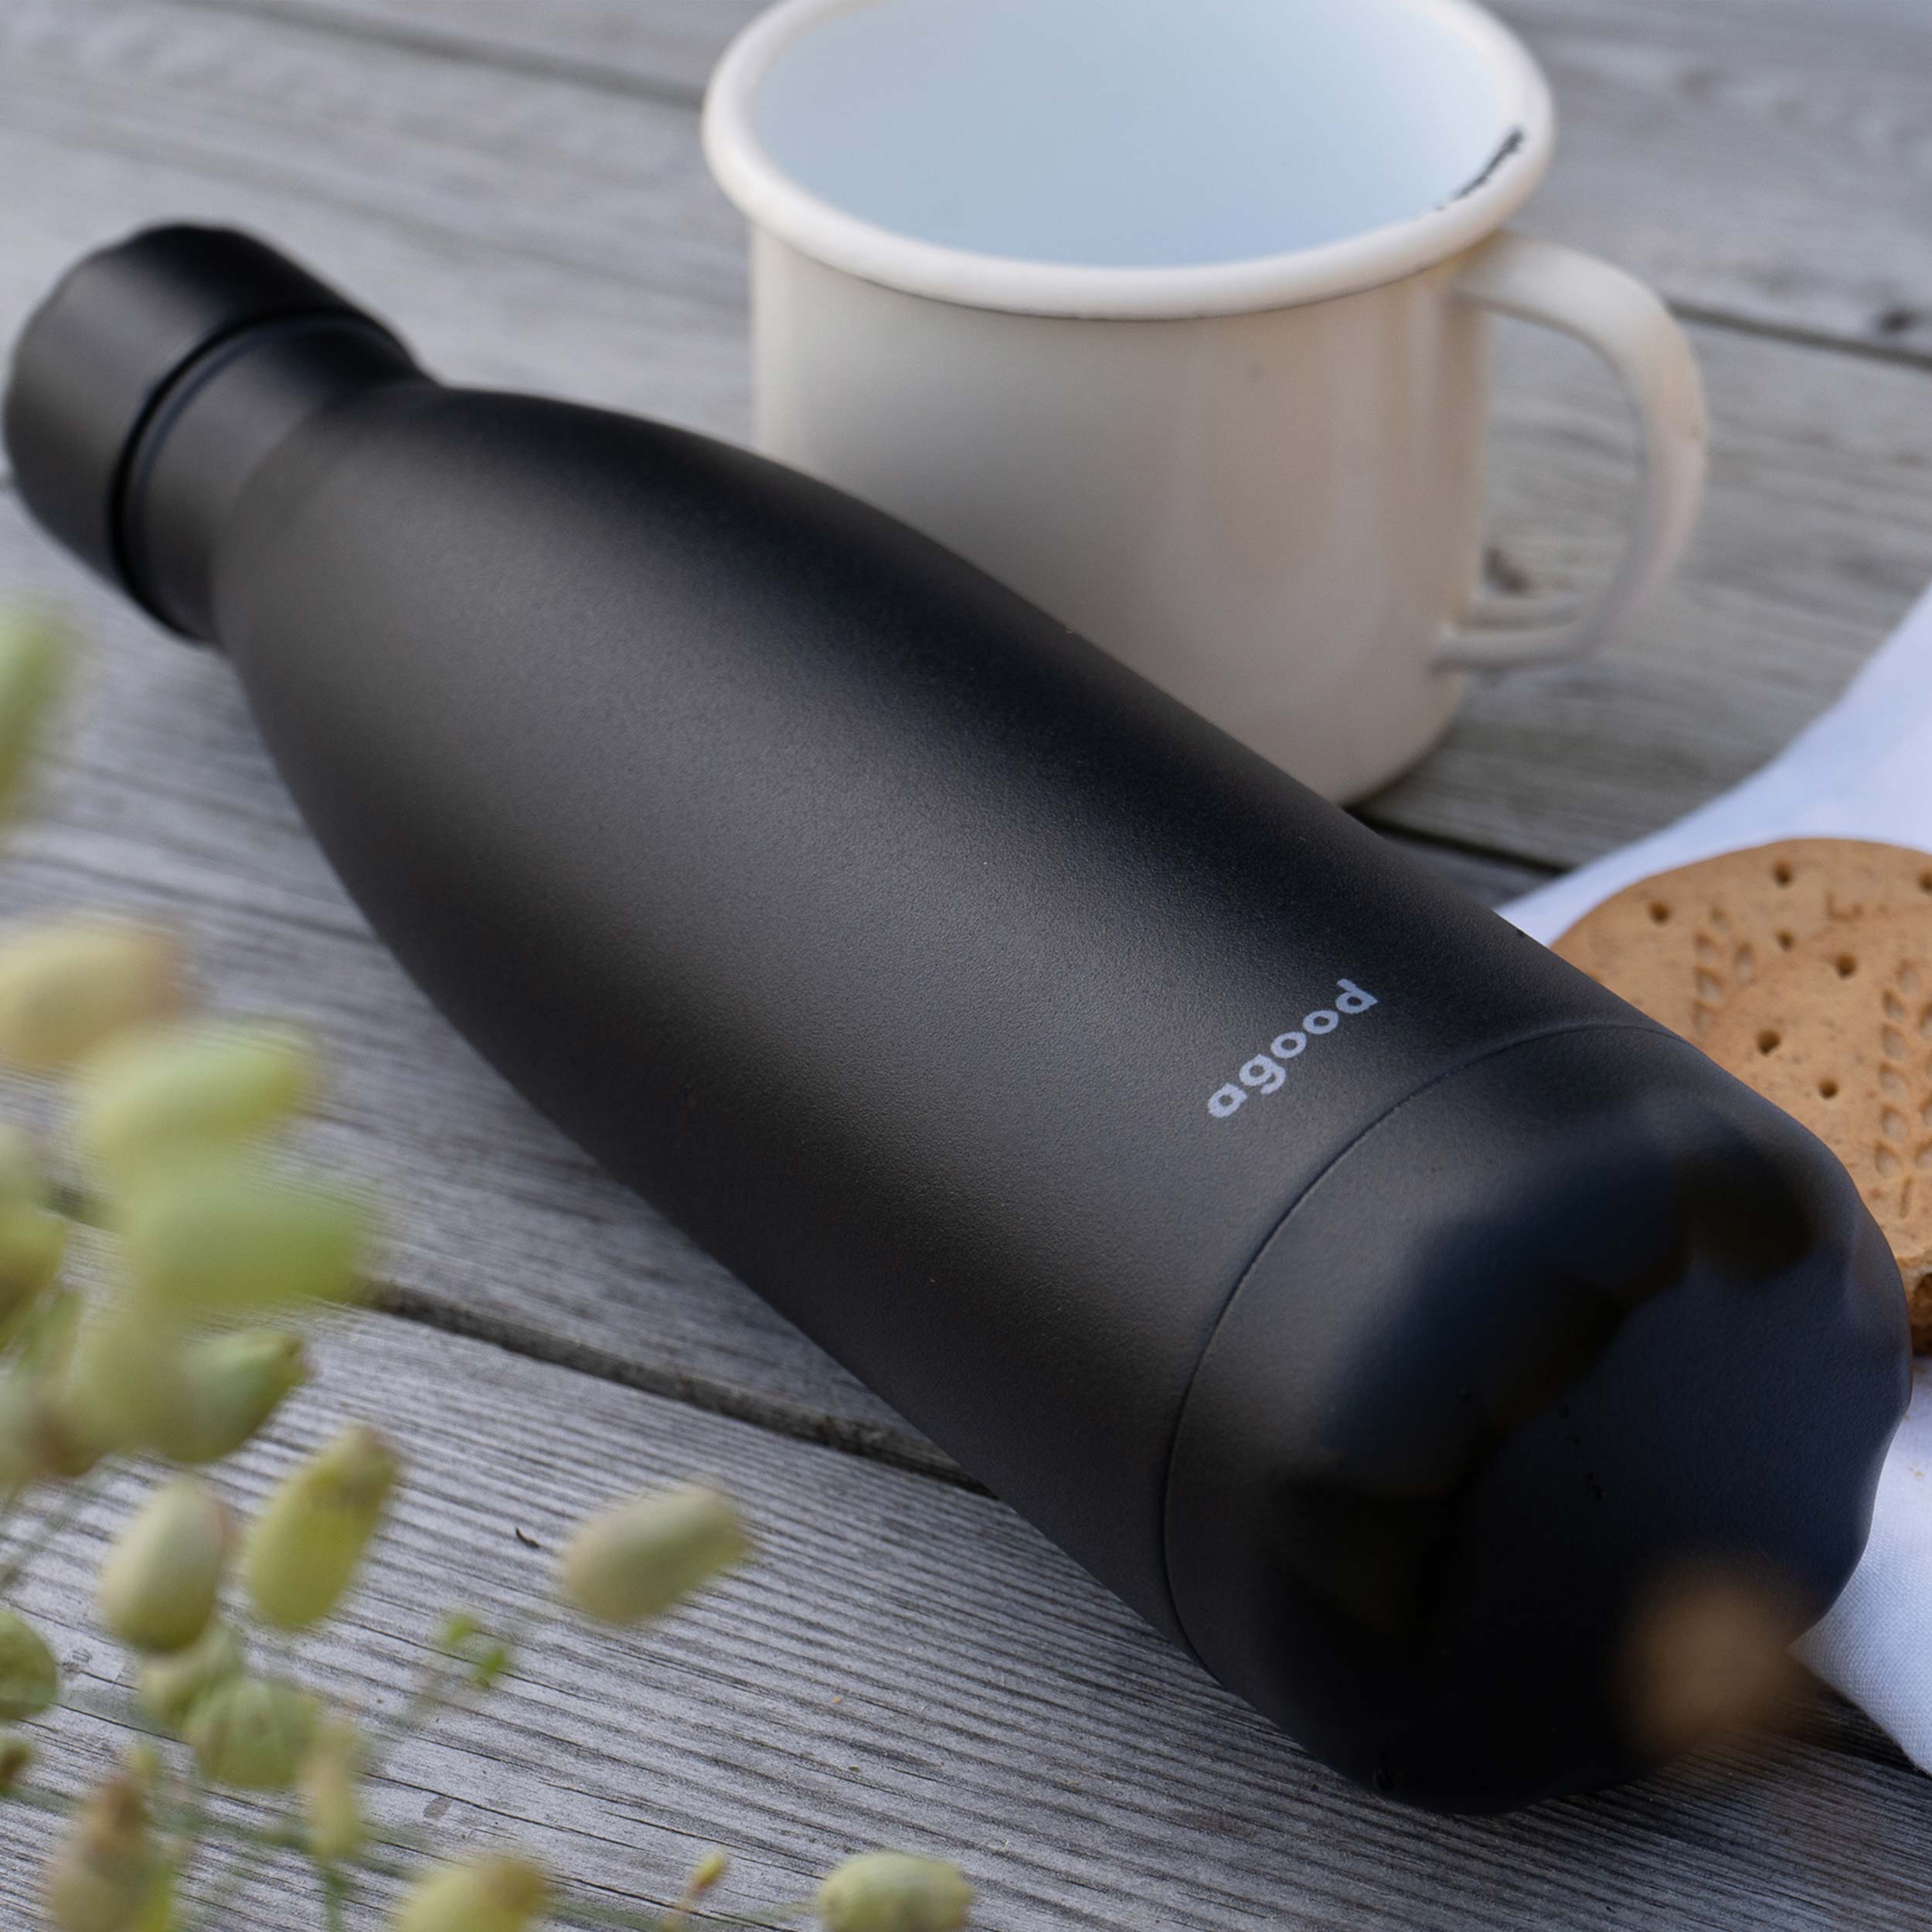 https://agood.com/products/a-good-bottle?variant=30252613894213